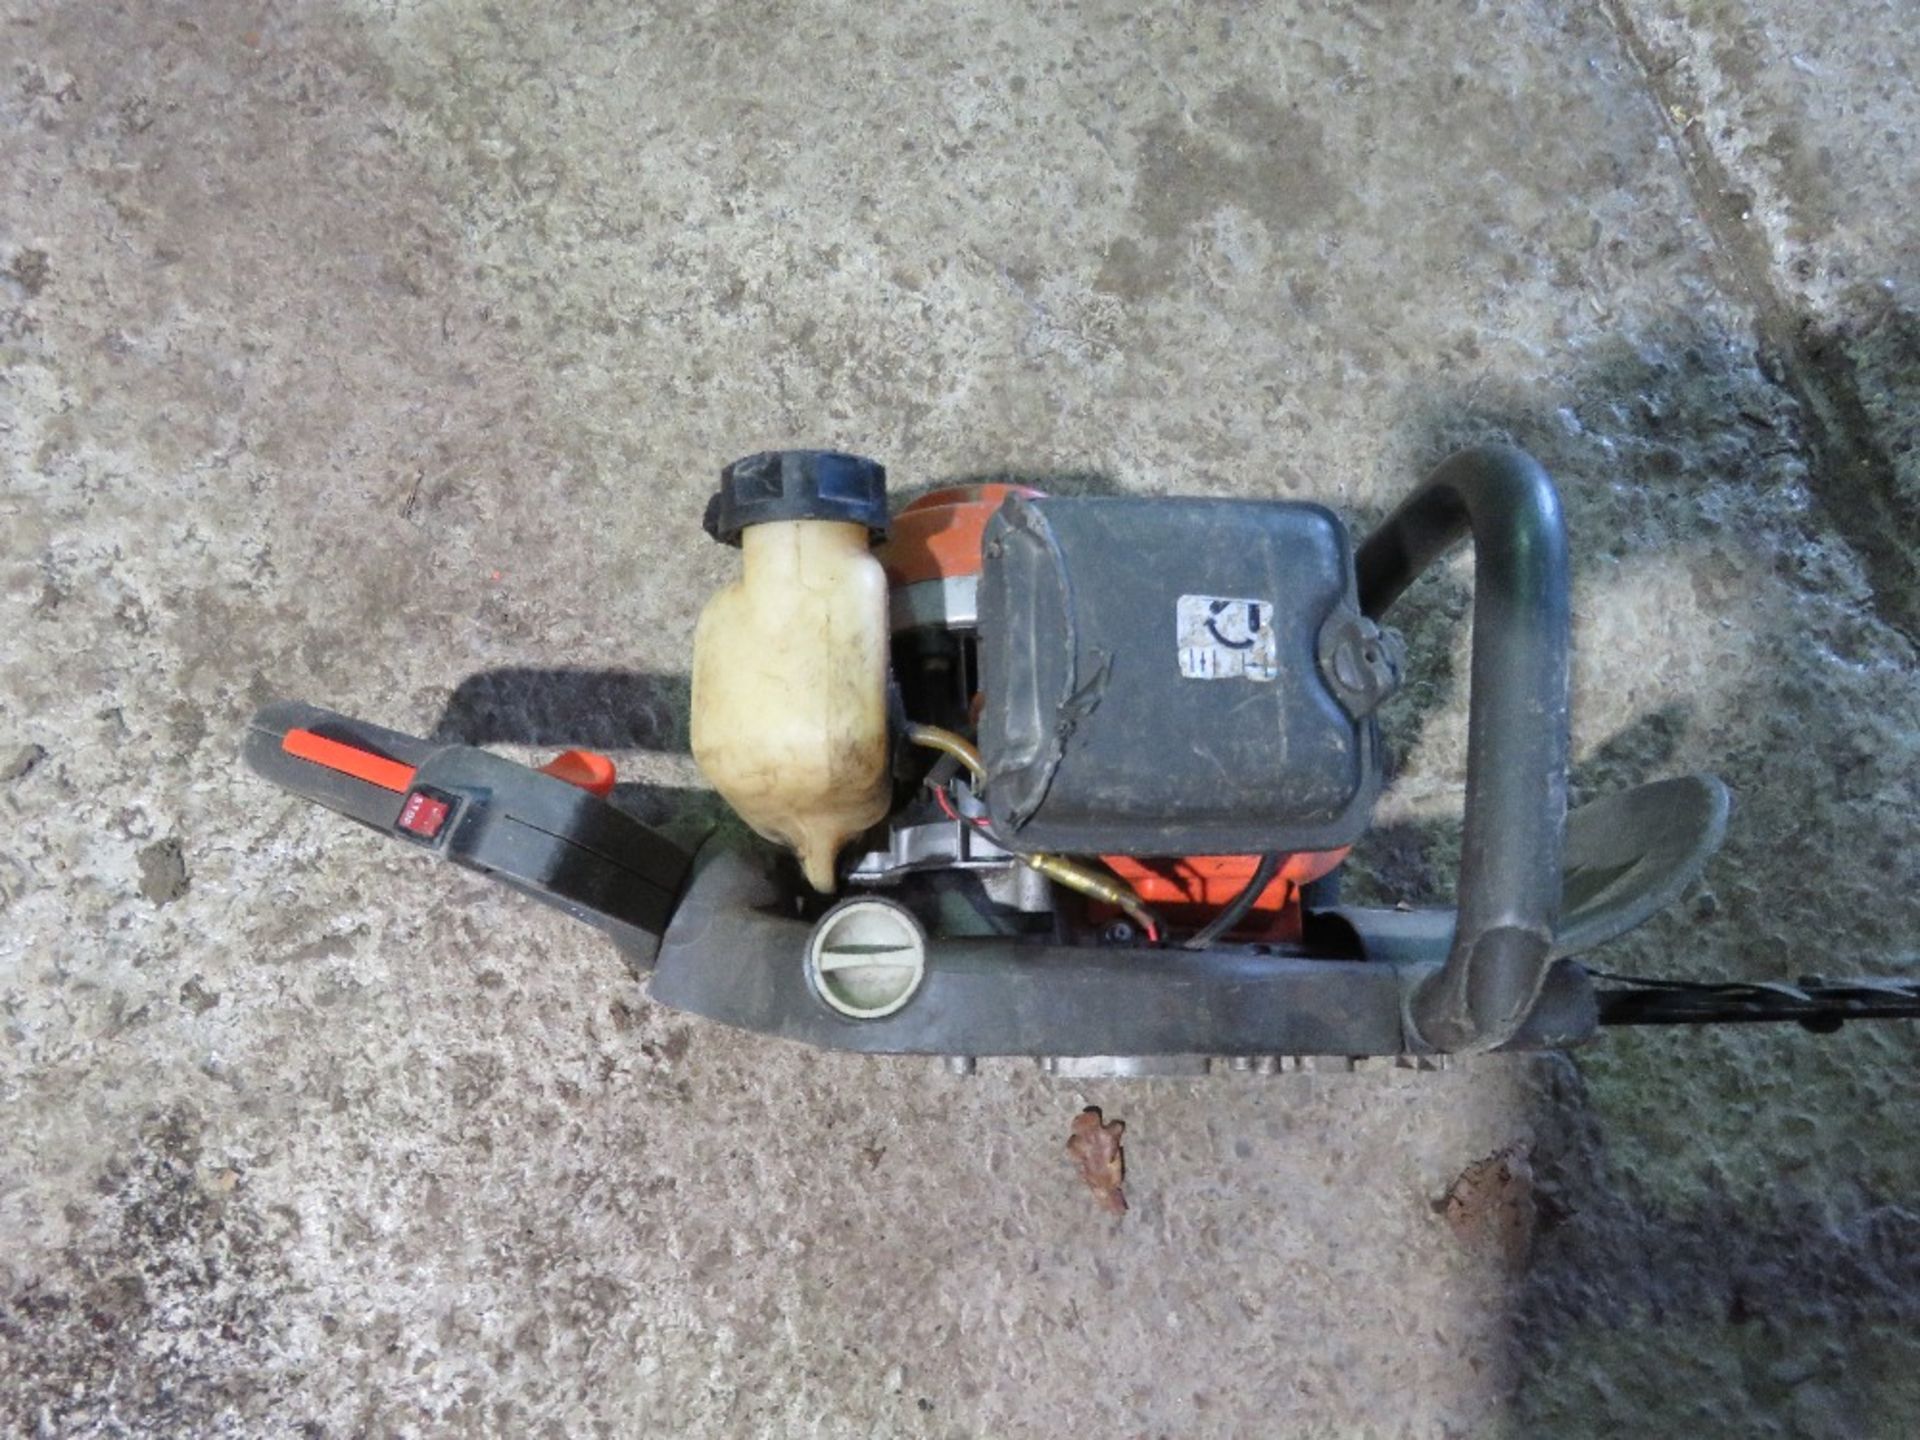 HUSQVARNA PETROL HEDGE CUTTER. THIS LOT IS SOLD UNDER THE AUCTIONEERS MARGIN SCHEME, THEREFORE NO - Image 4 of 5